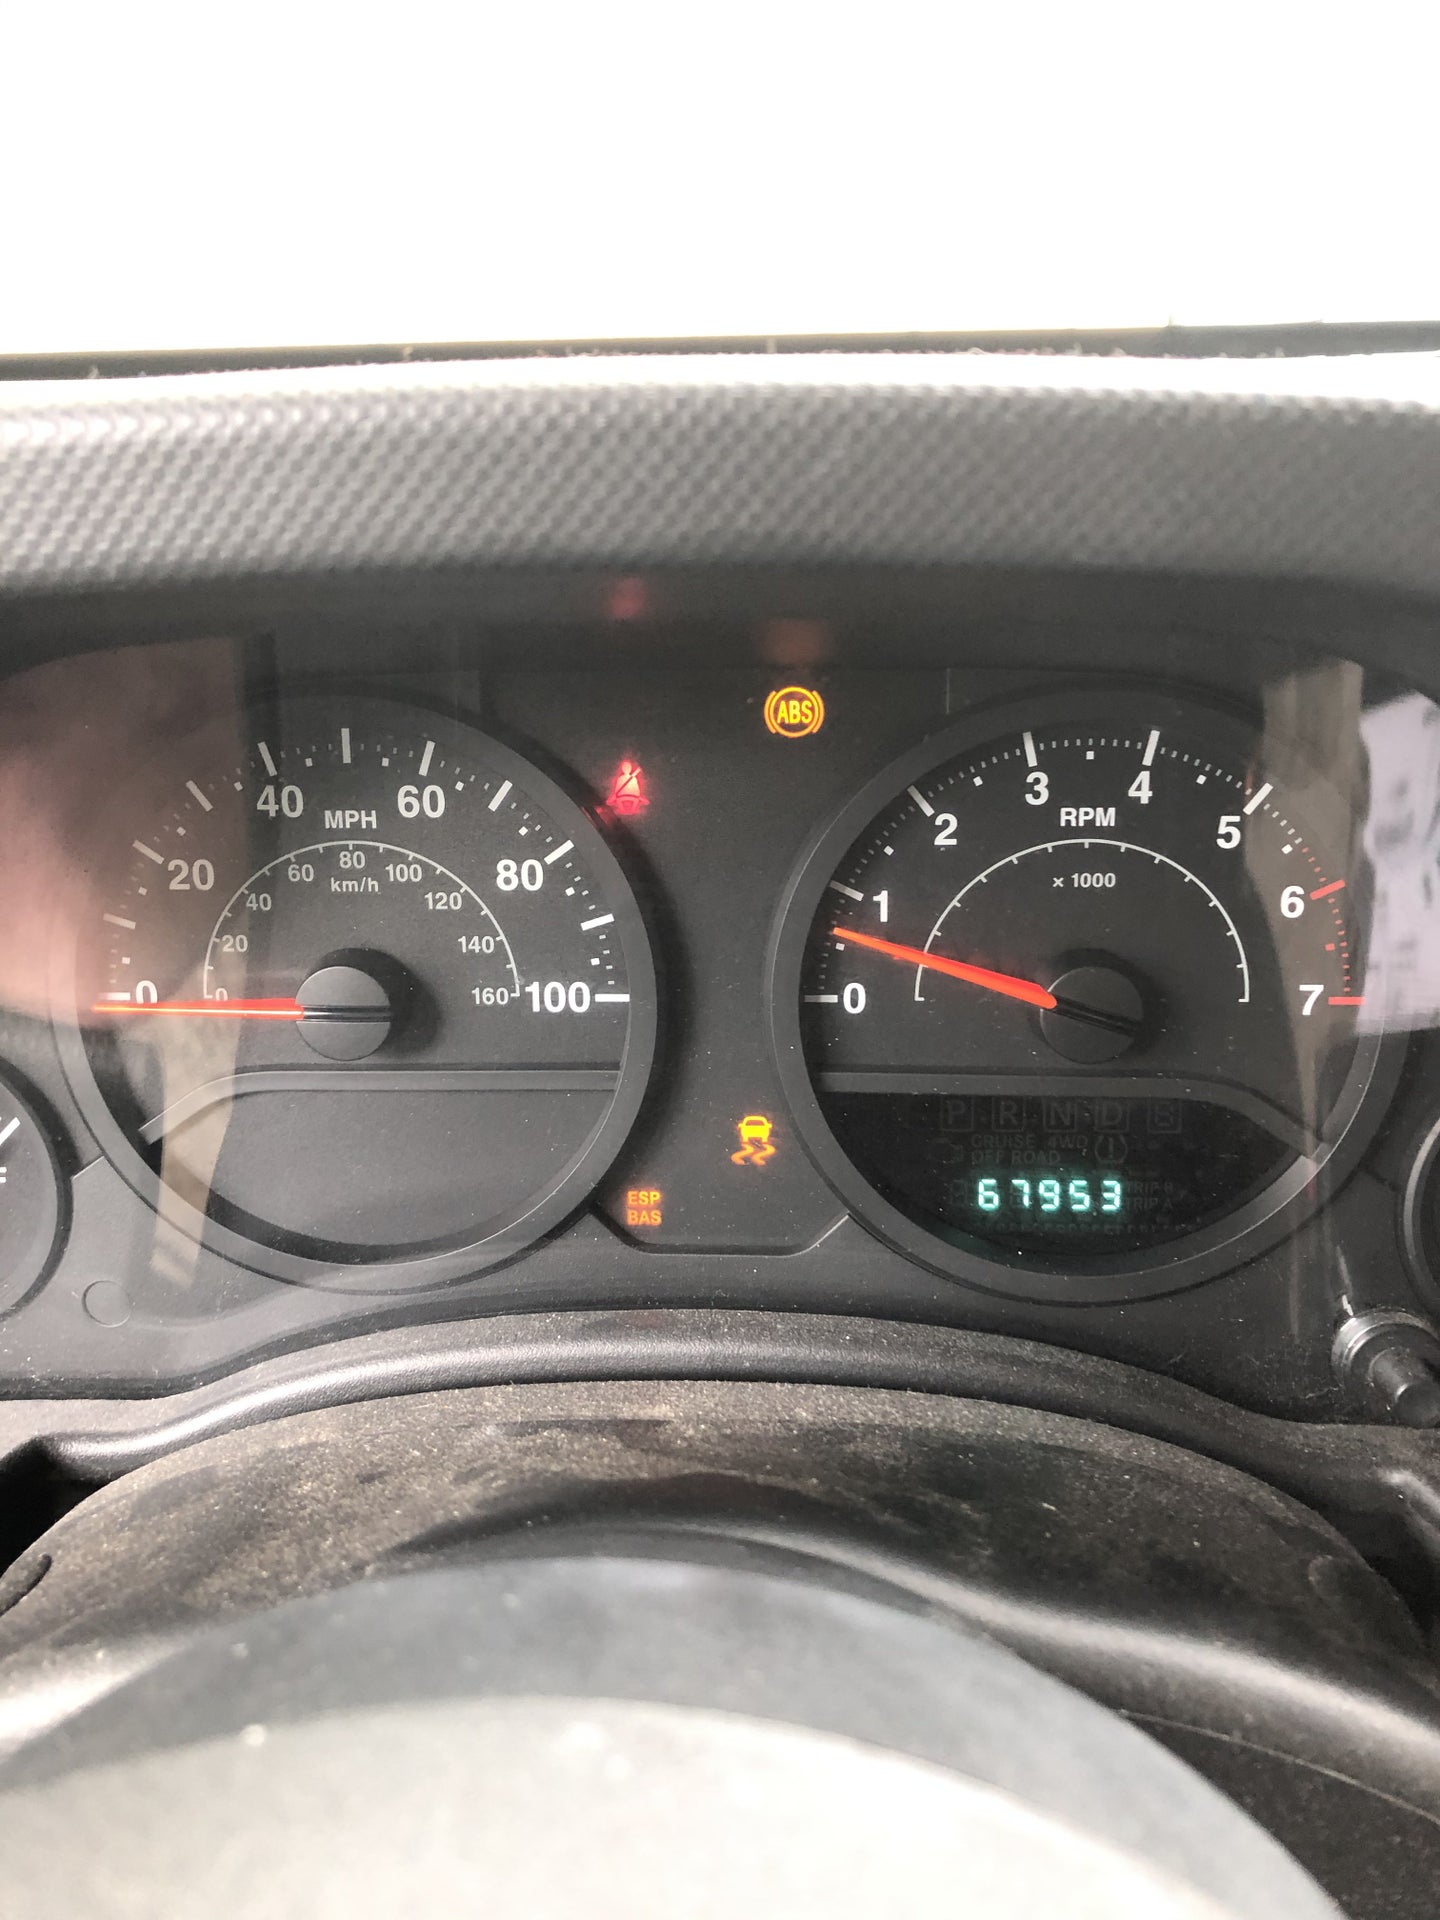 JK TECH- Why does my ABS/Traction light keep coming on? | Page 7 | Jeep  Wrangler Forum